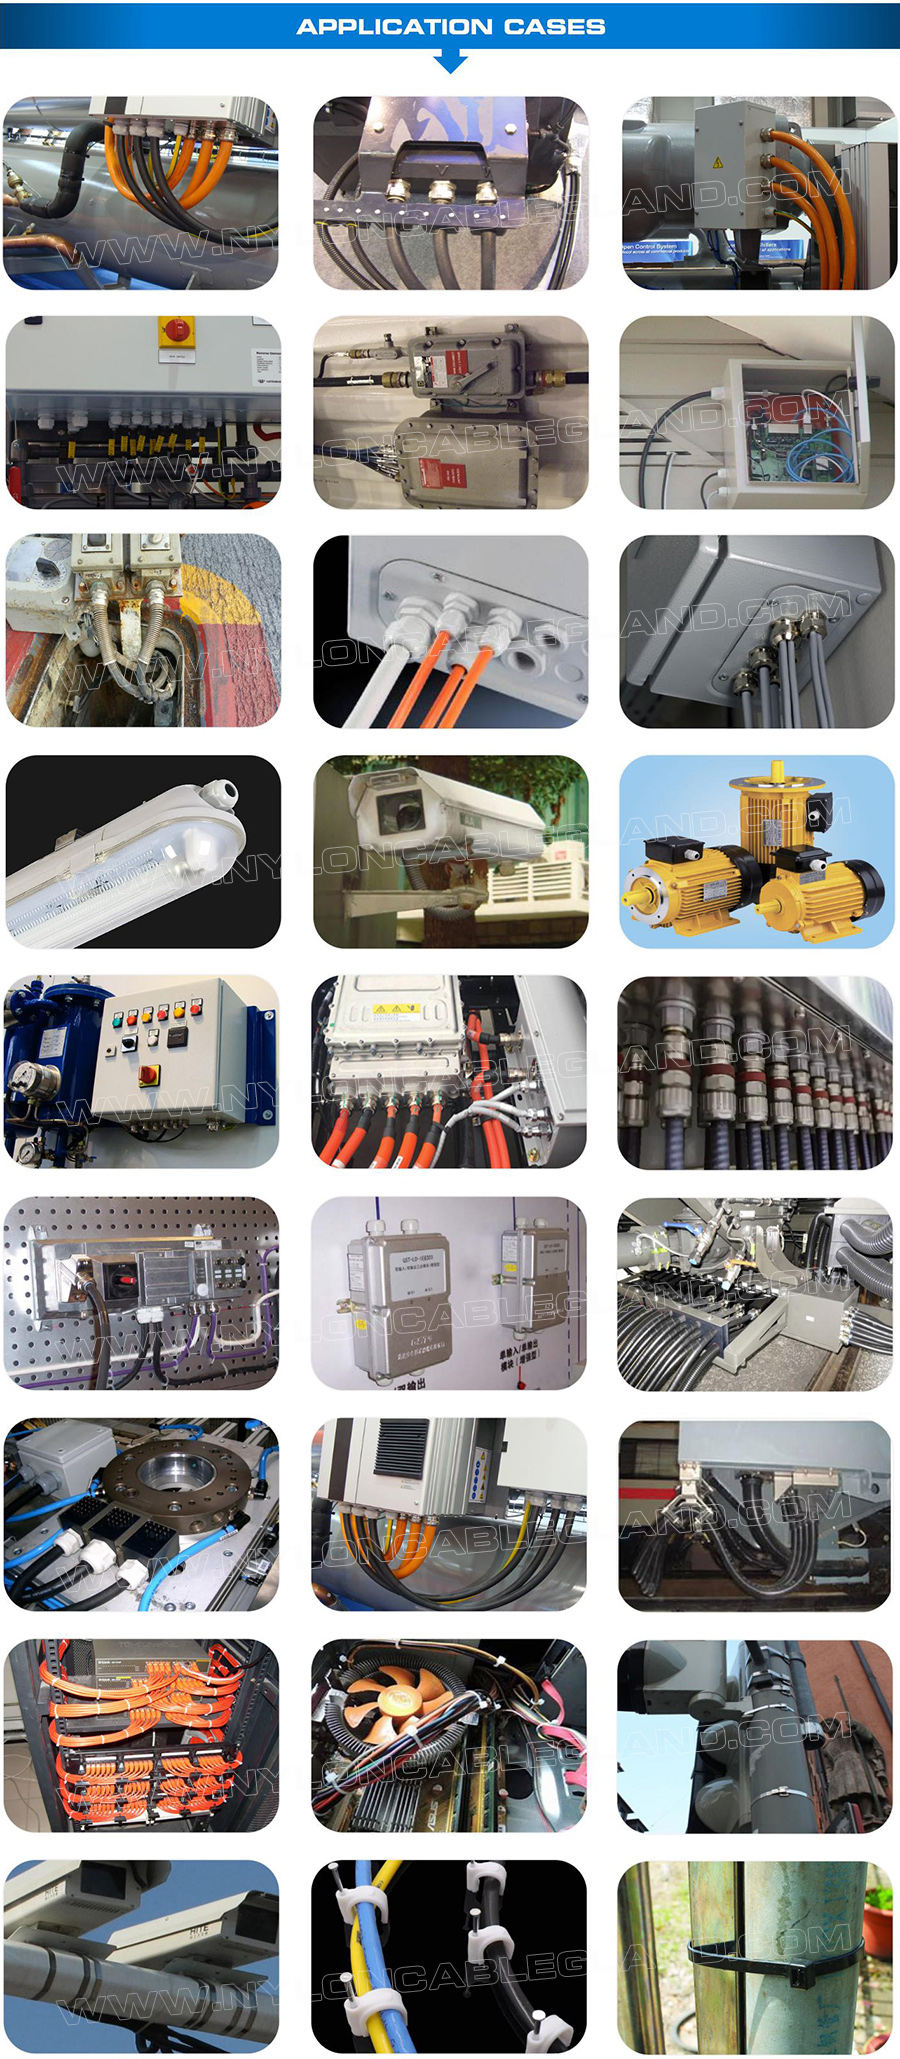 Applications for Cable Glands, Cord Grips, Tie Wraps, Cable Ties